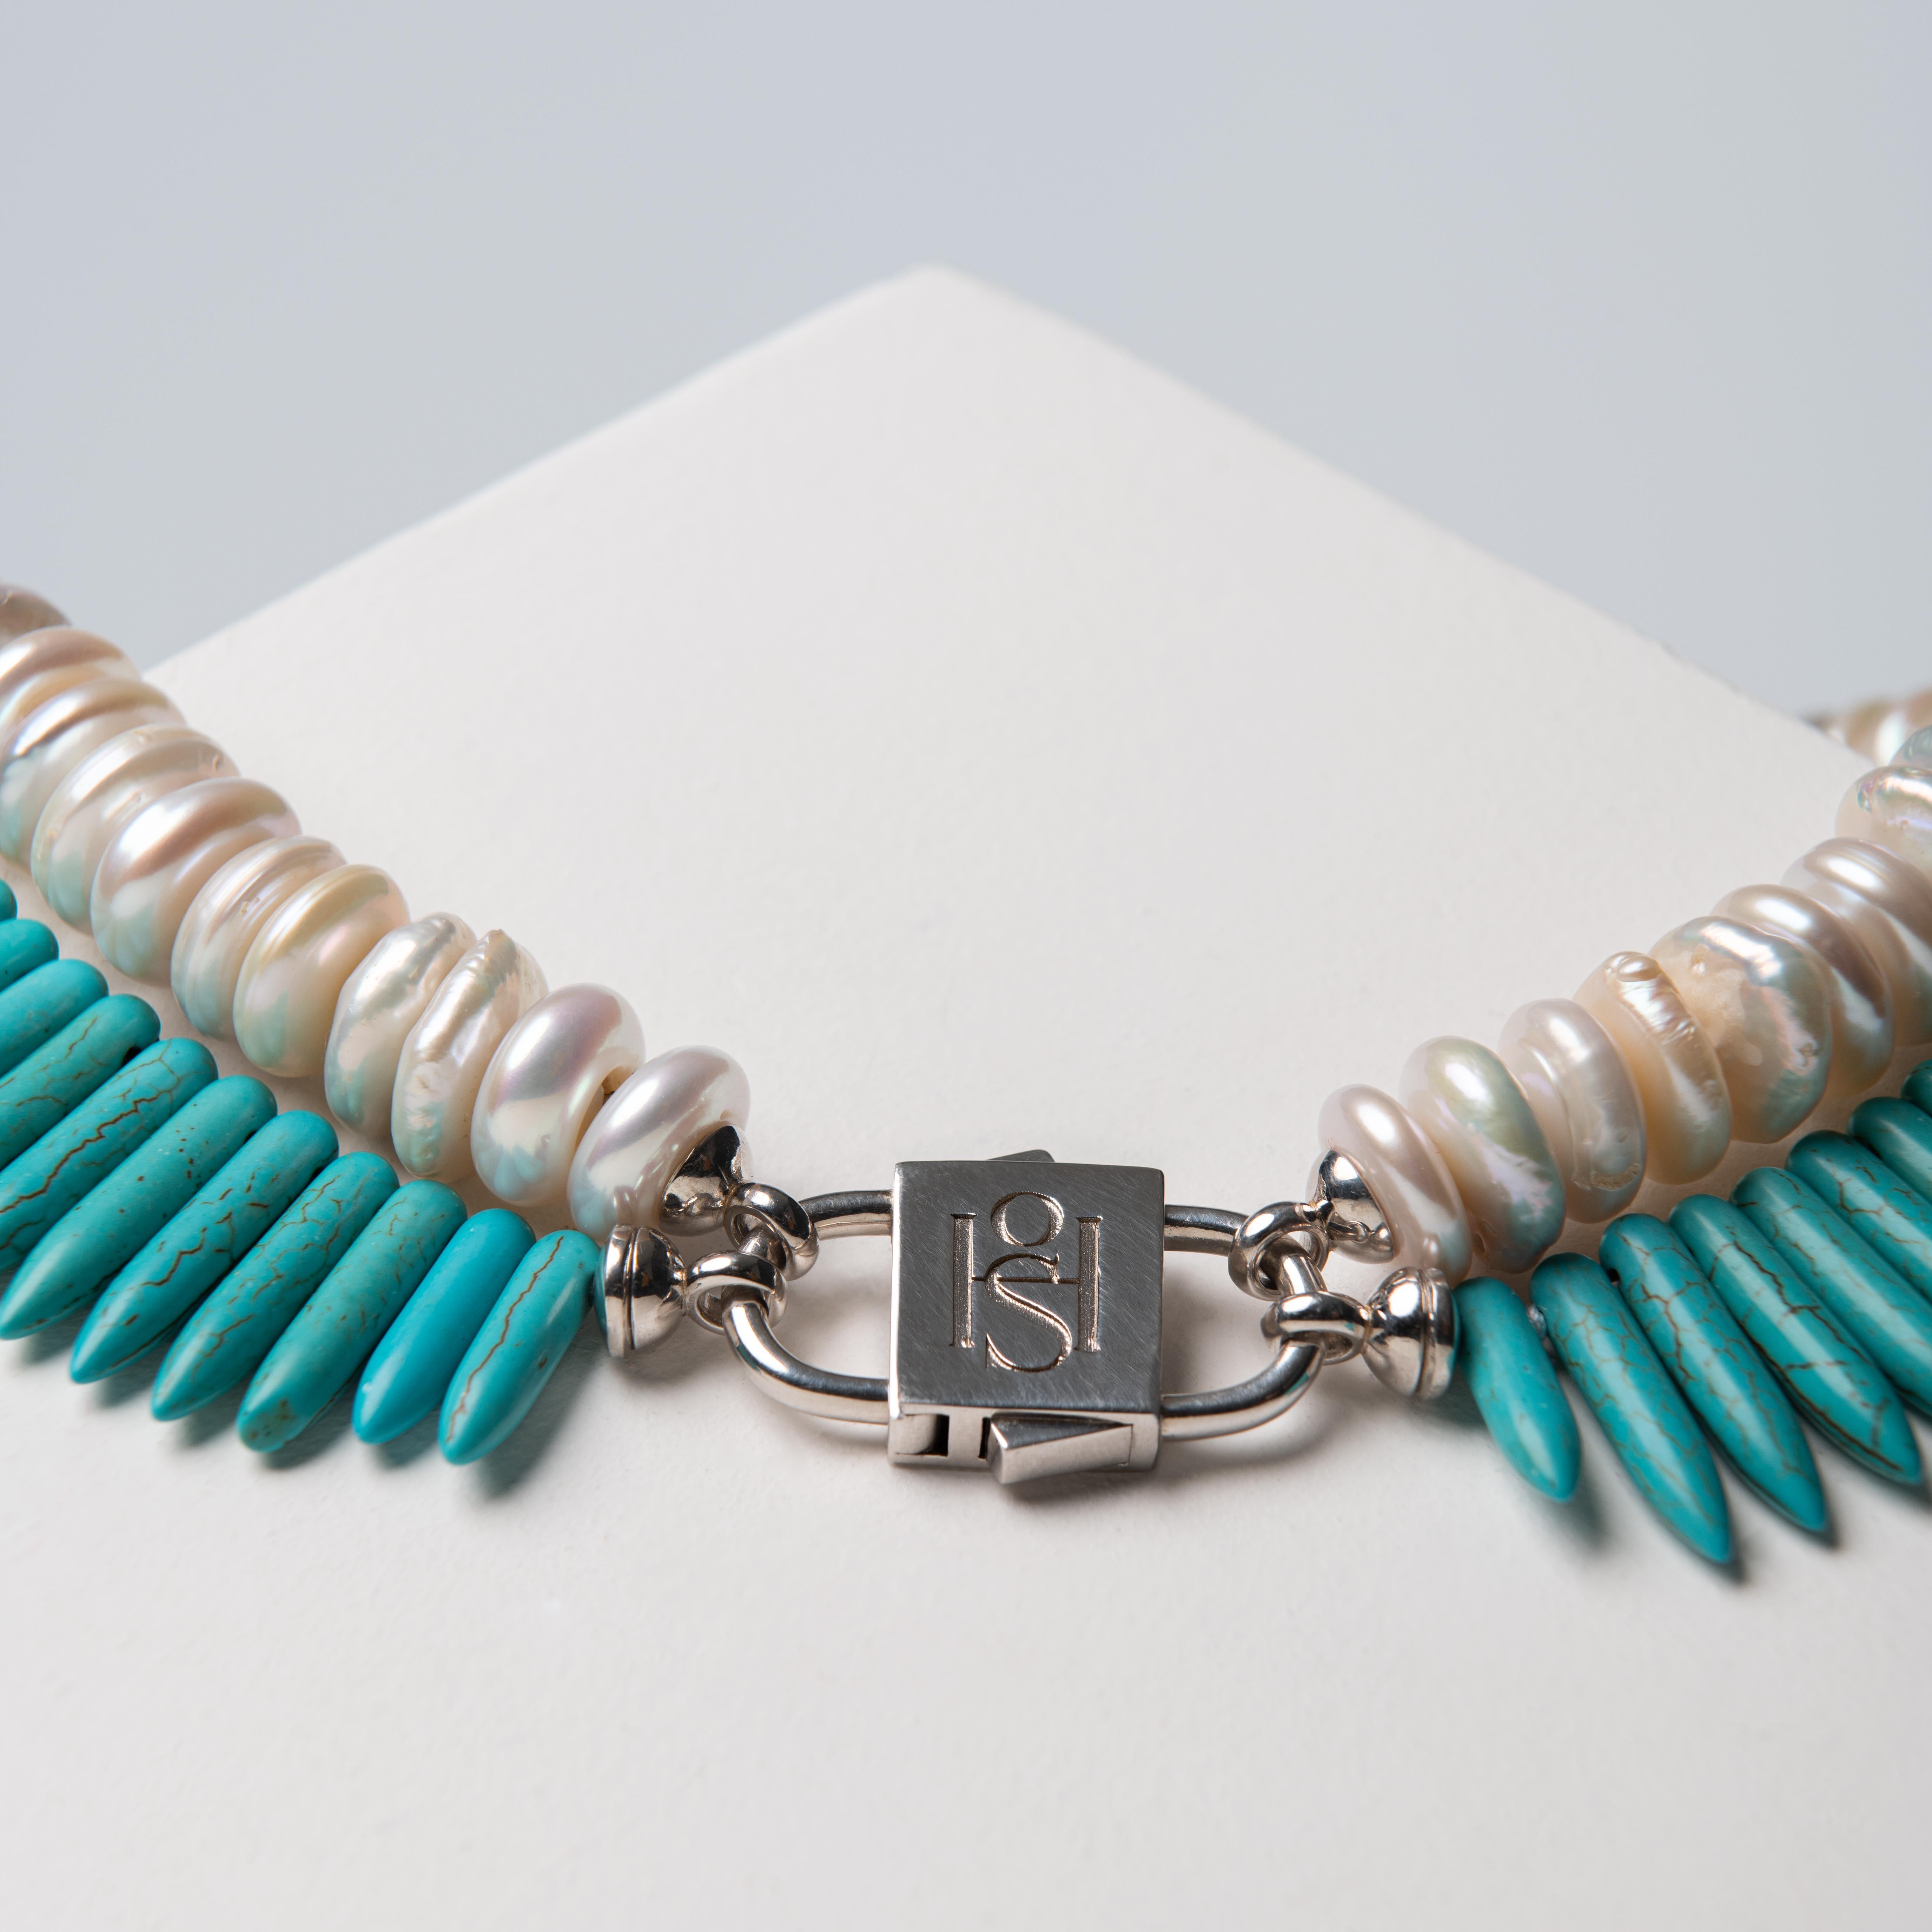 House of Sol Rondelle Pearl and Turquoise Howlite Necklace with HoS Lock In New Condition For Sale In Sarasota, FL